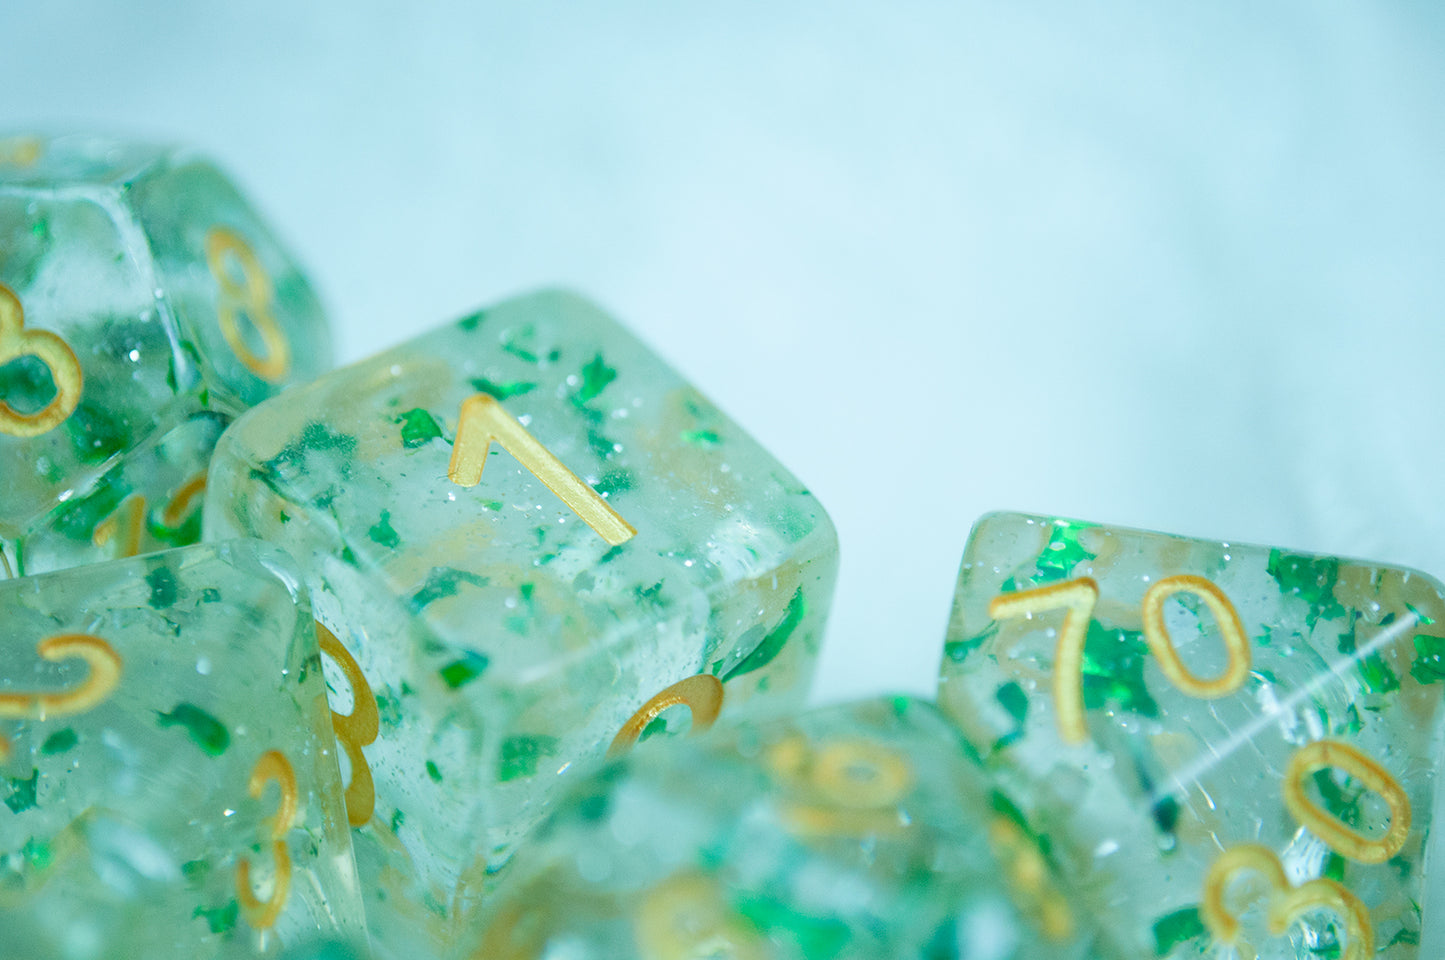 A close up of the Metallic Emerald 7 piece dice set from Tabletop Loot with green metallic flakes suspended in clear resin with glitter and gold numbering.